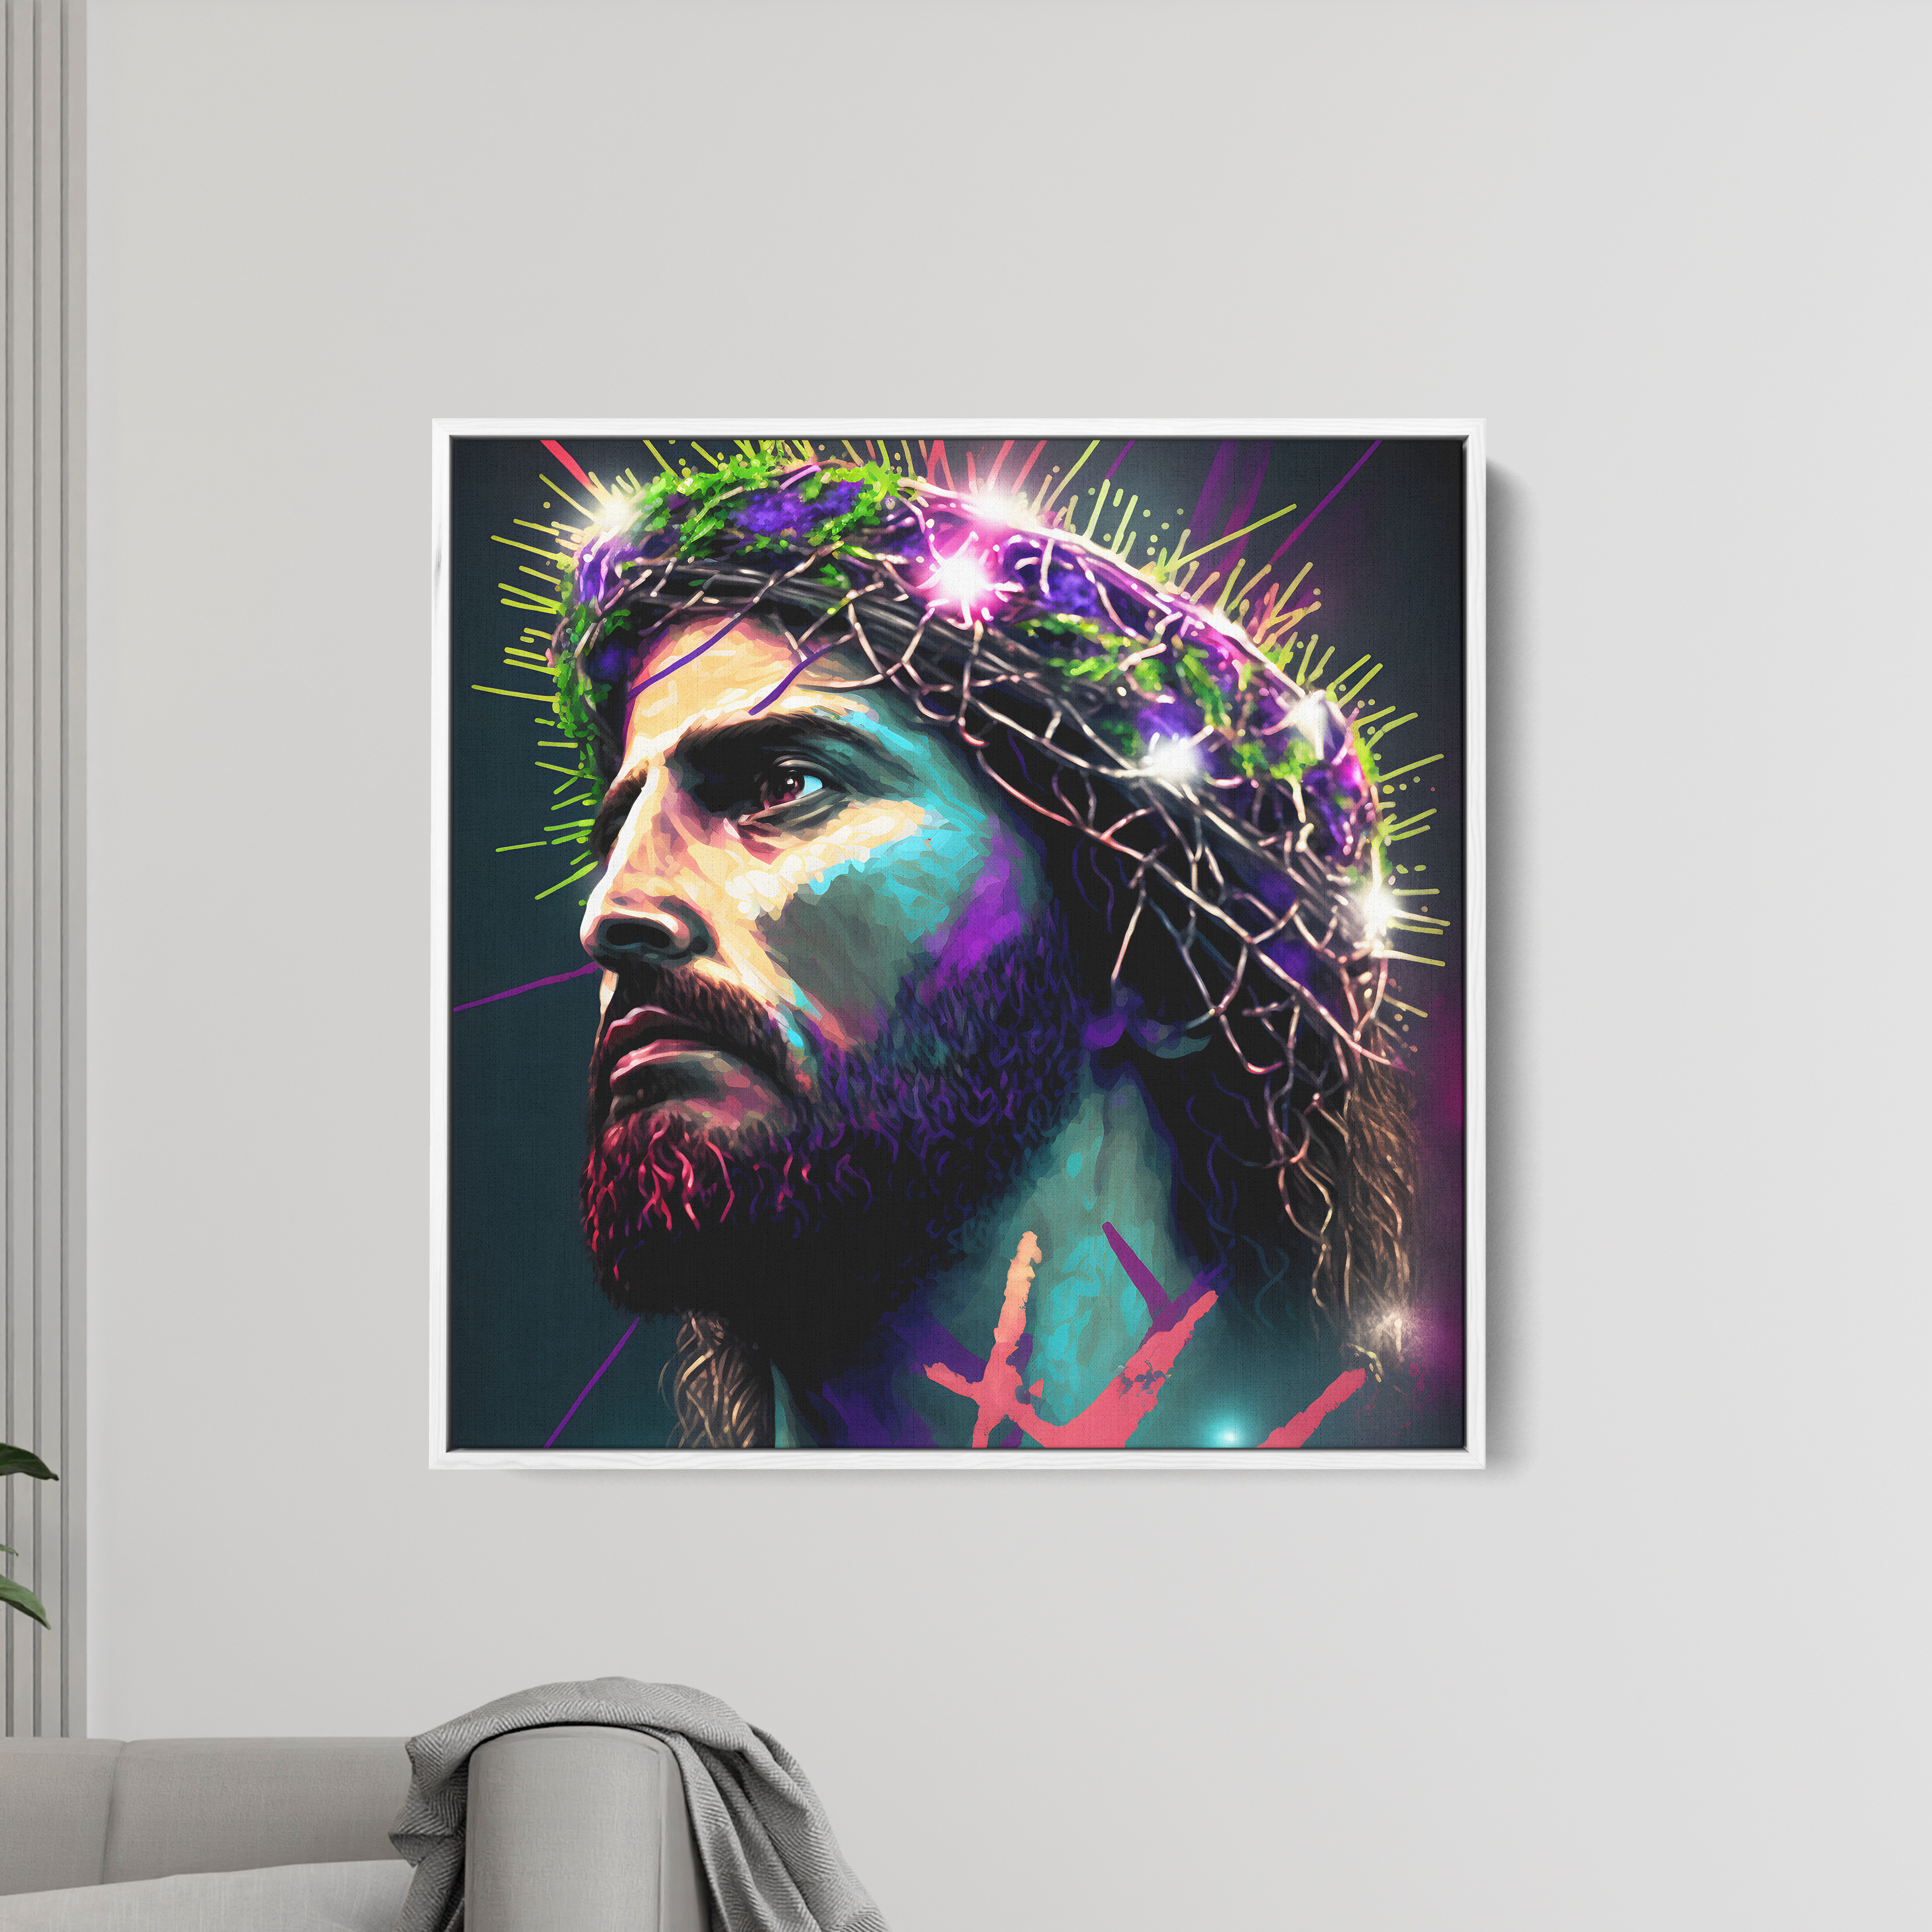 Colorful Jesus Face With Lighting Crown On Head Canvas Wall Painting